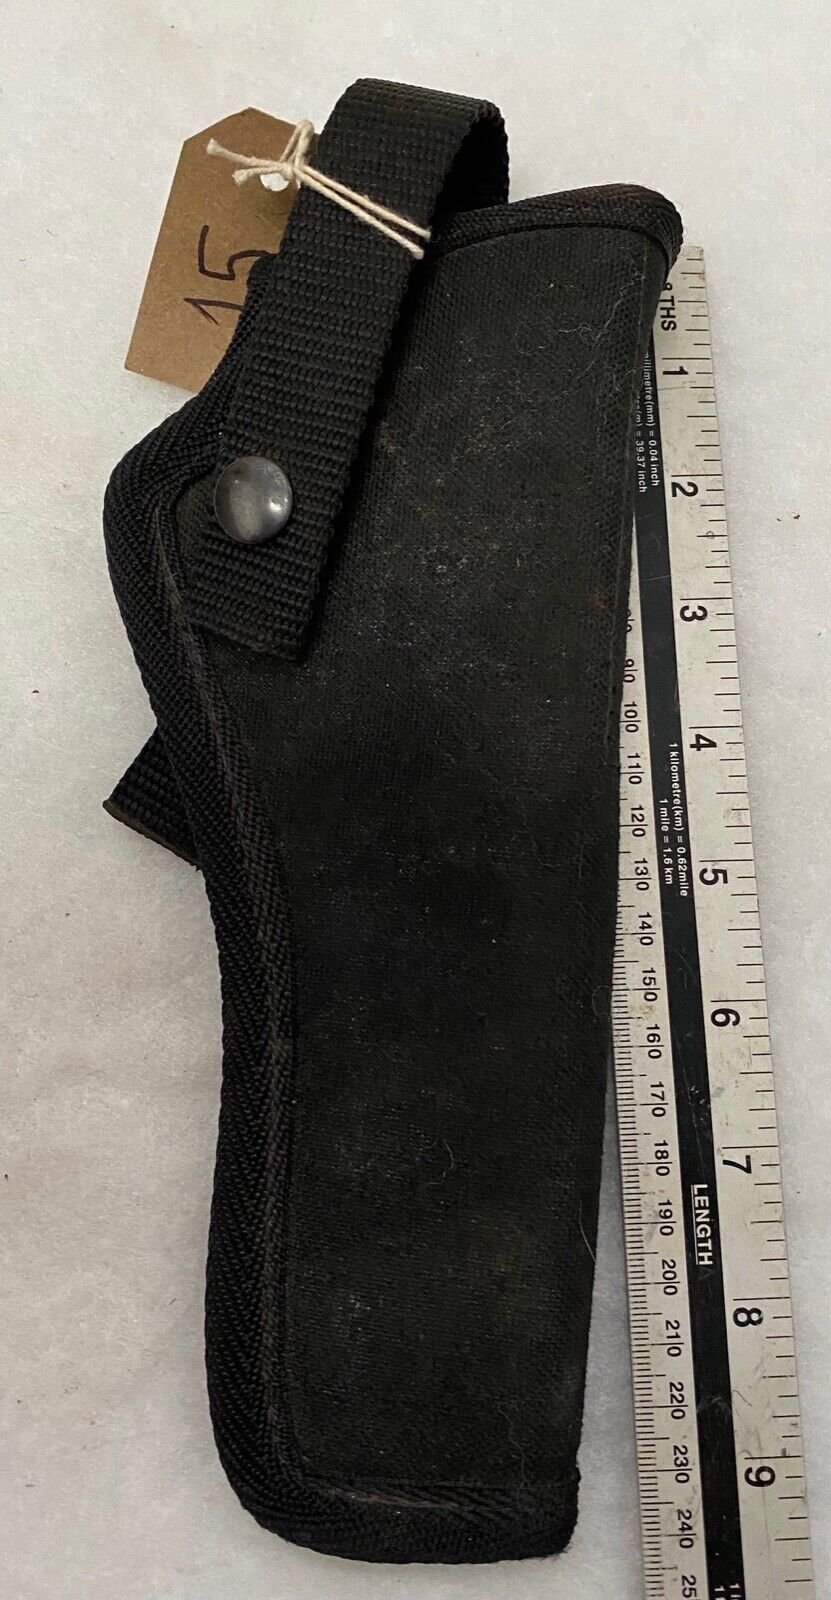 Good quality fabric Pistol Holster - made by Gould & Goodrich - Size 26